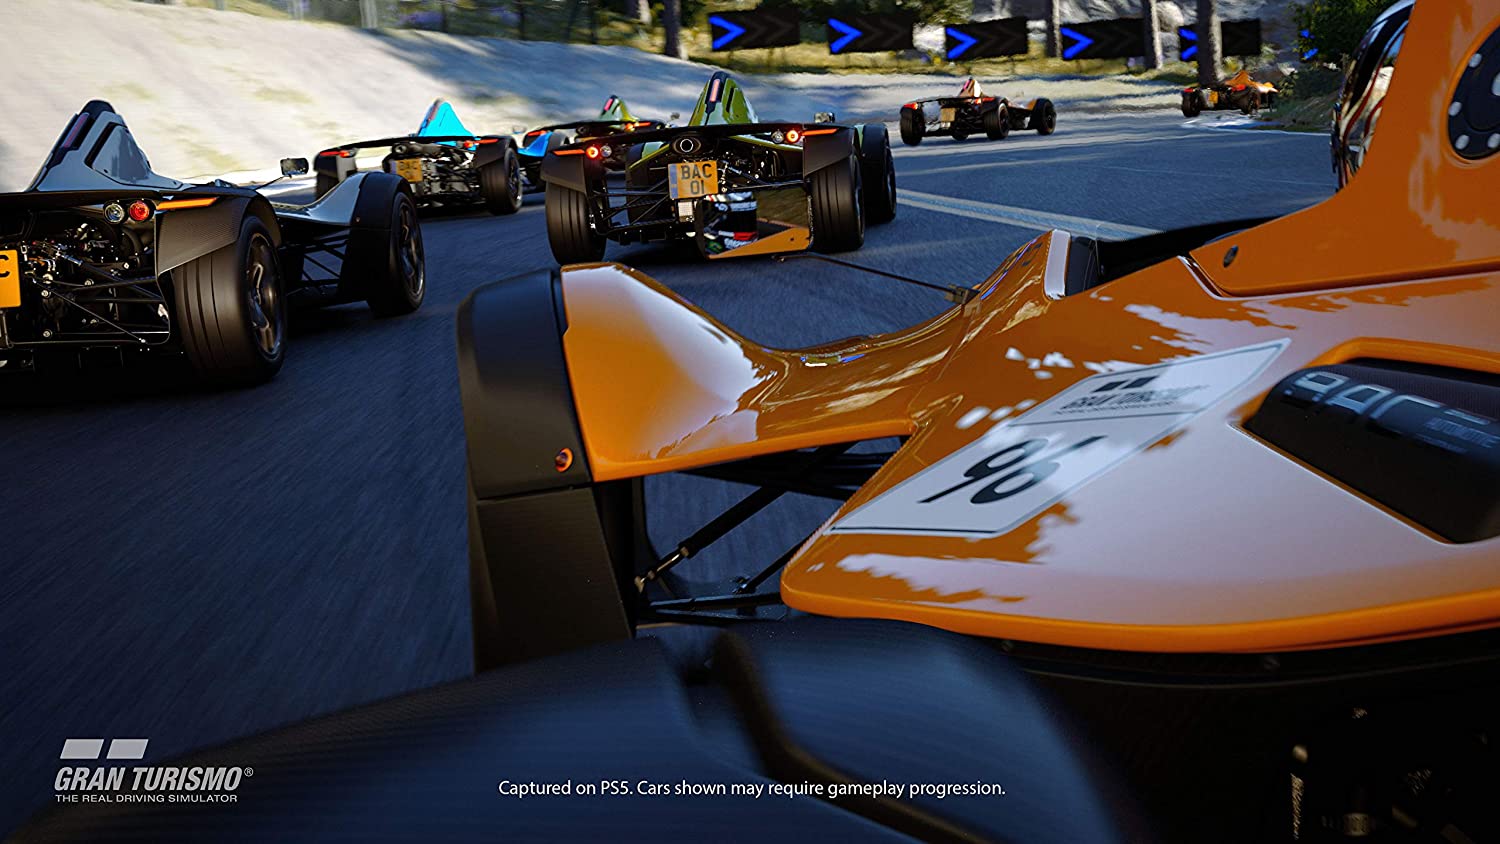 February 2022 State of Play Stars PS5 Version of Gran Turismo 7